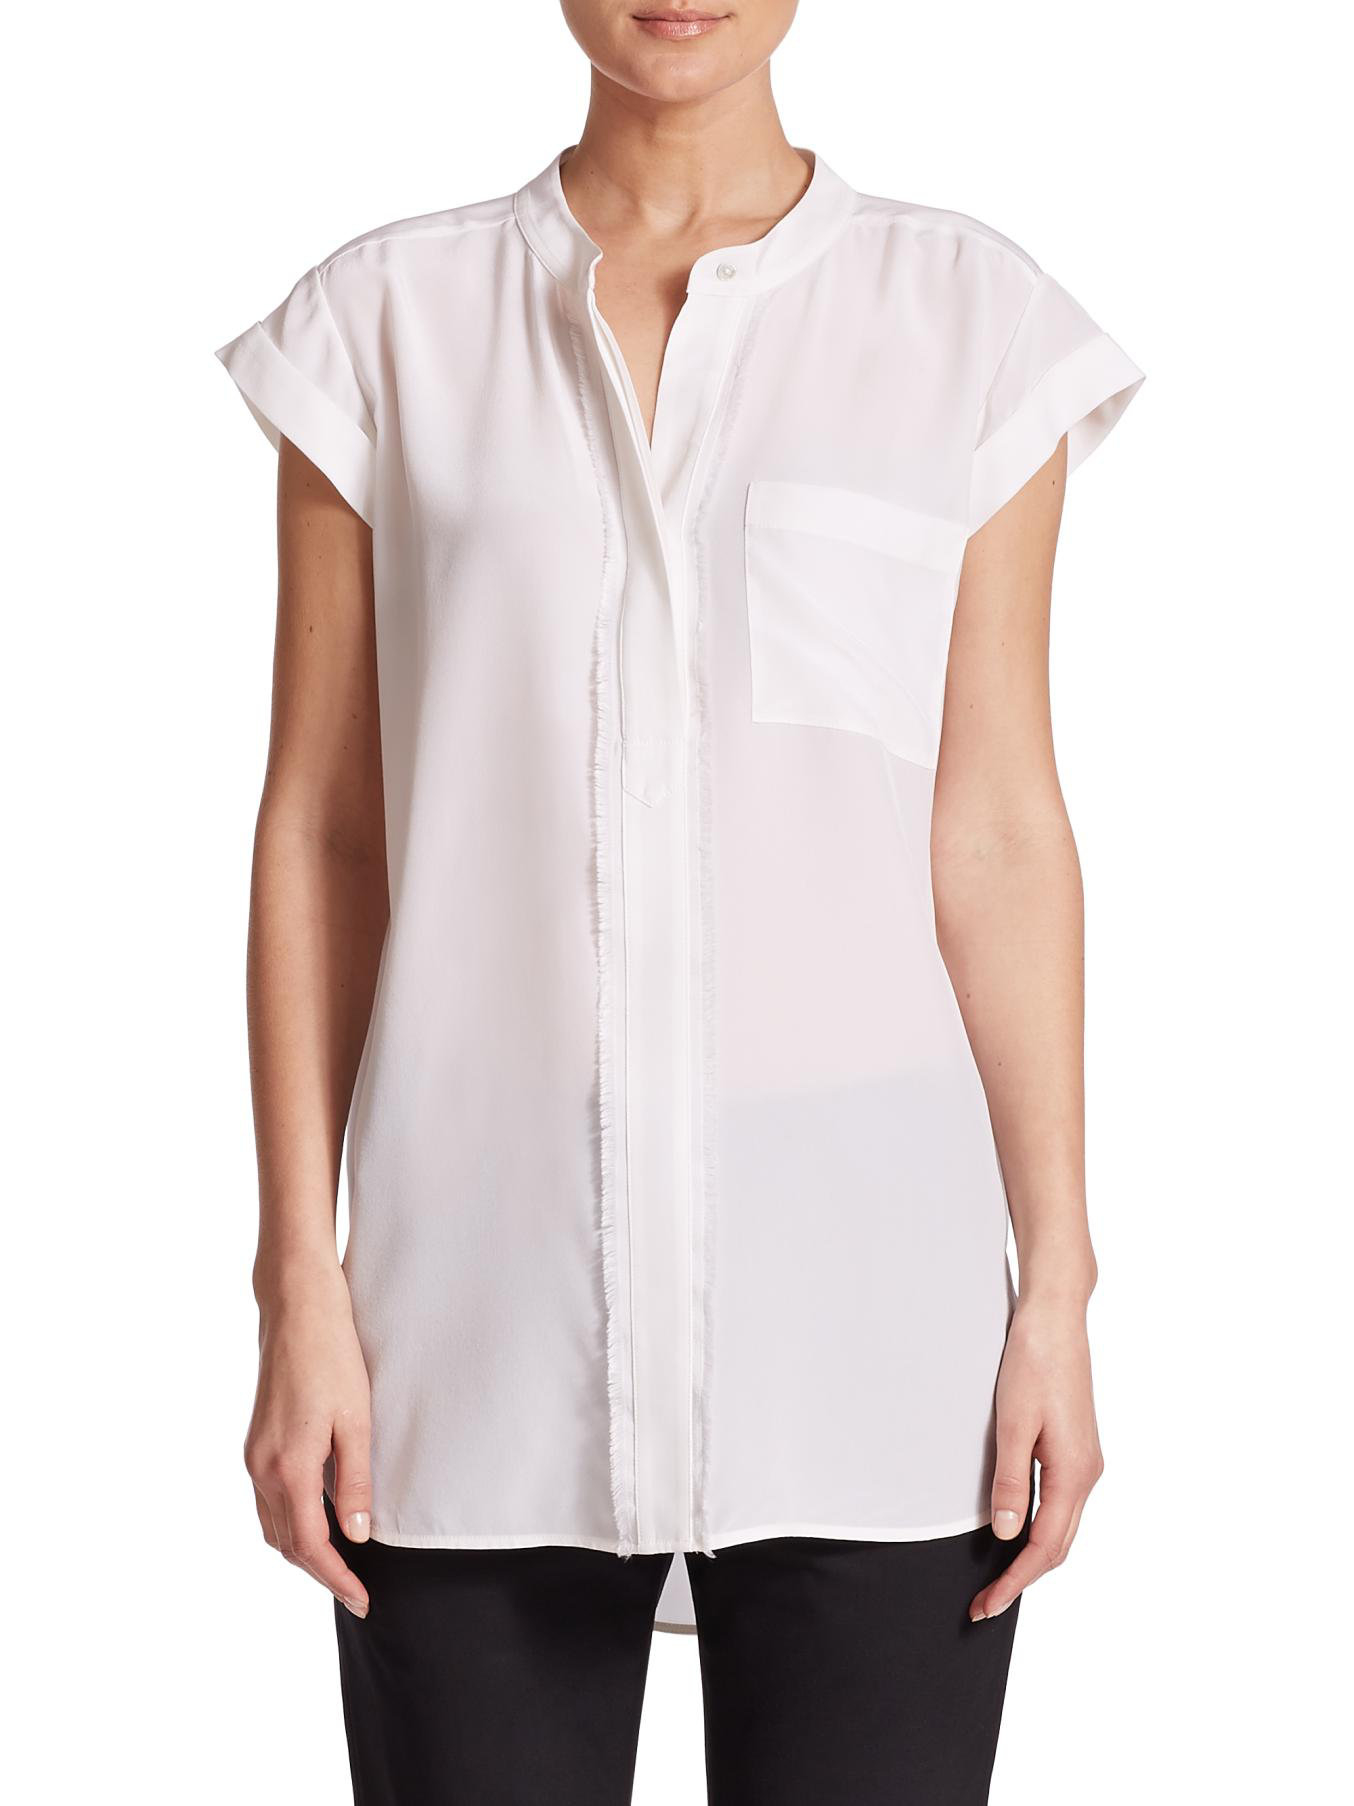 celebrity wearing white overlay blouse vince